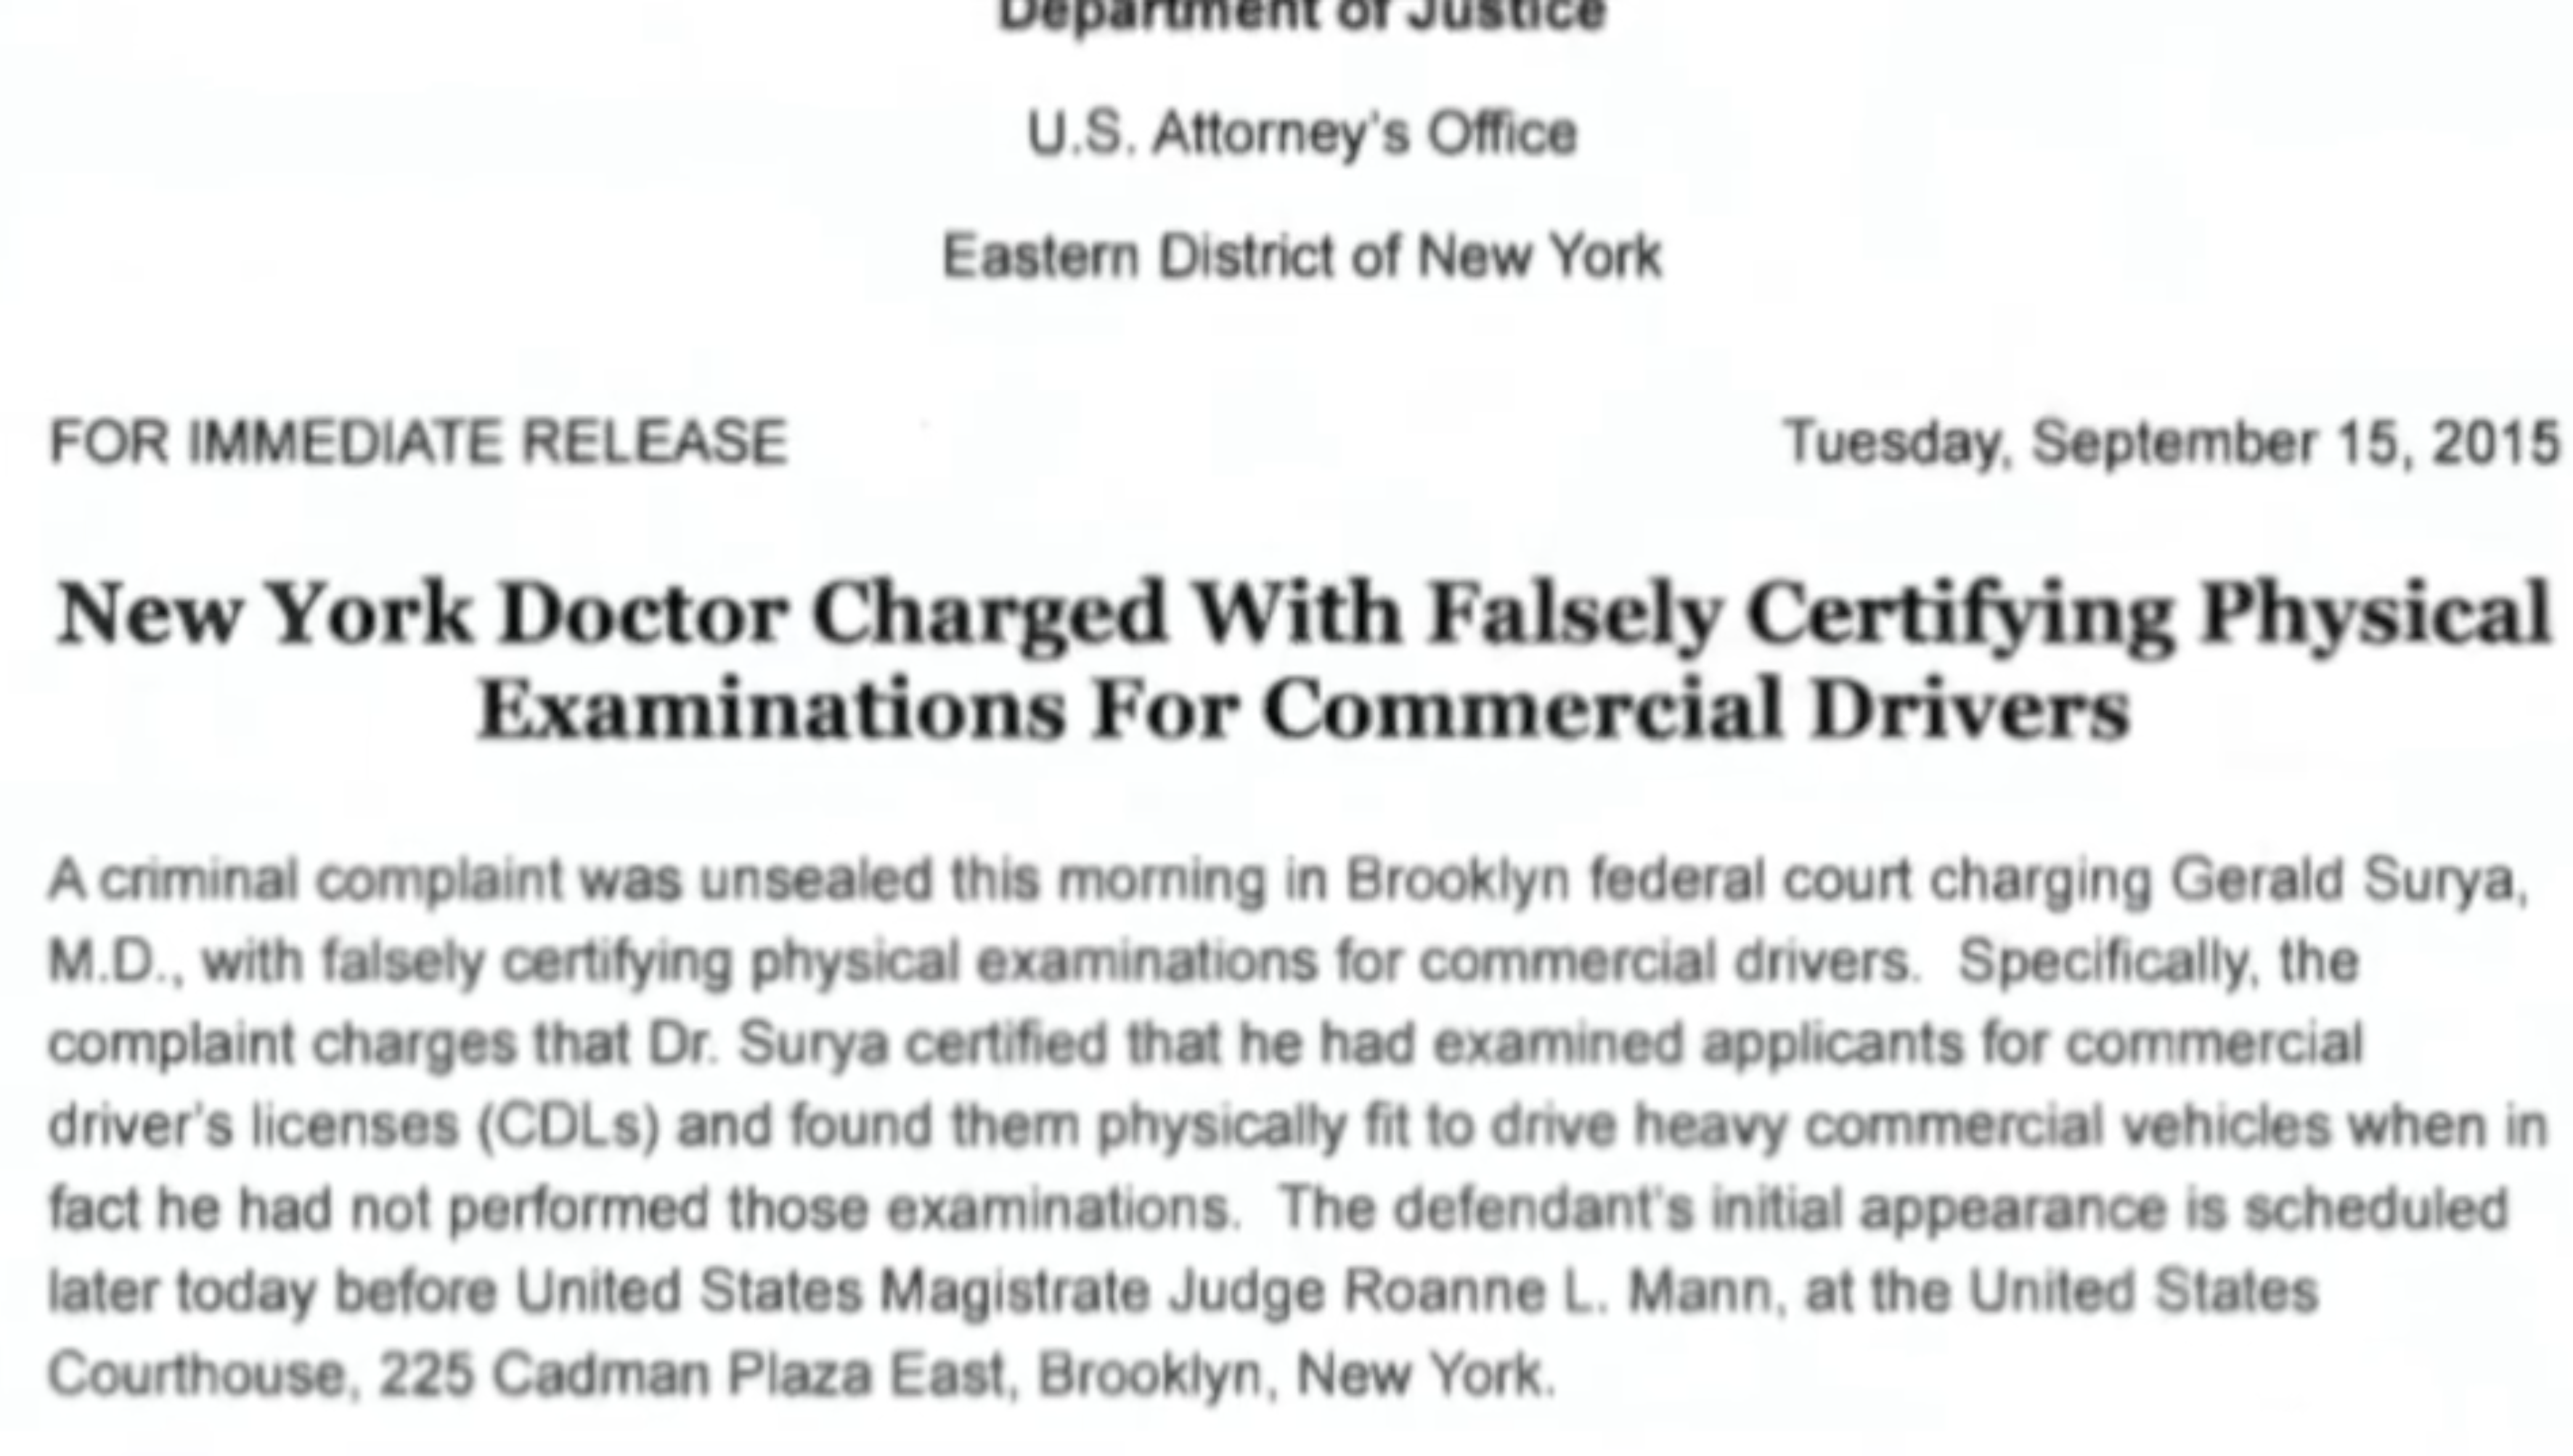 New York doctor charged with falsely certifying physical examinations for commercial drivers